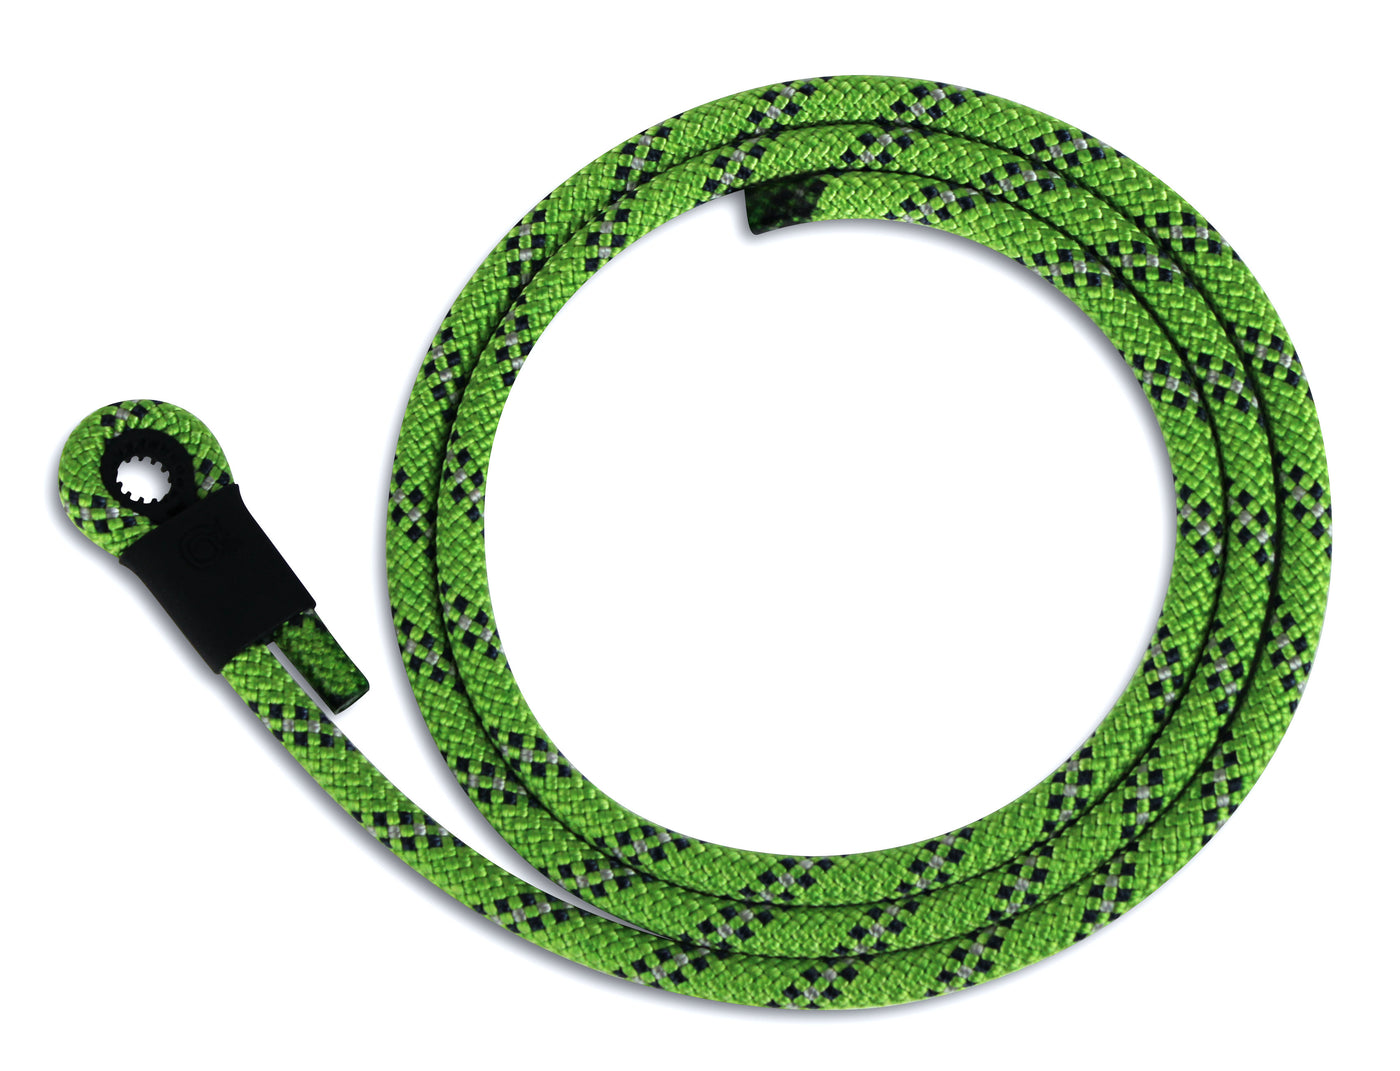 Lizard Tail Belts Green Grabber green with dark and light accents rope belt